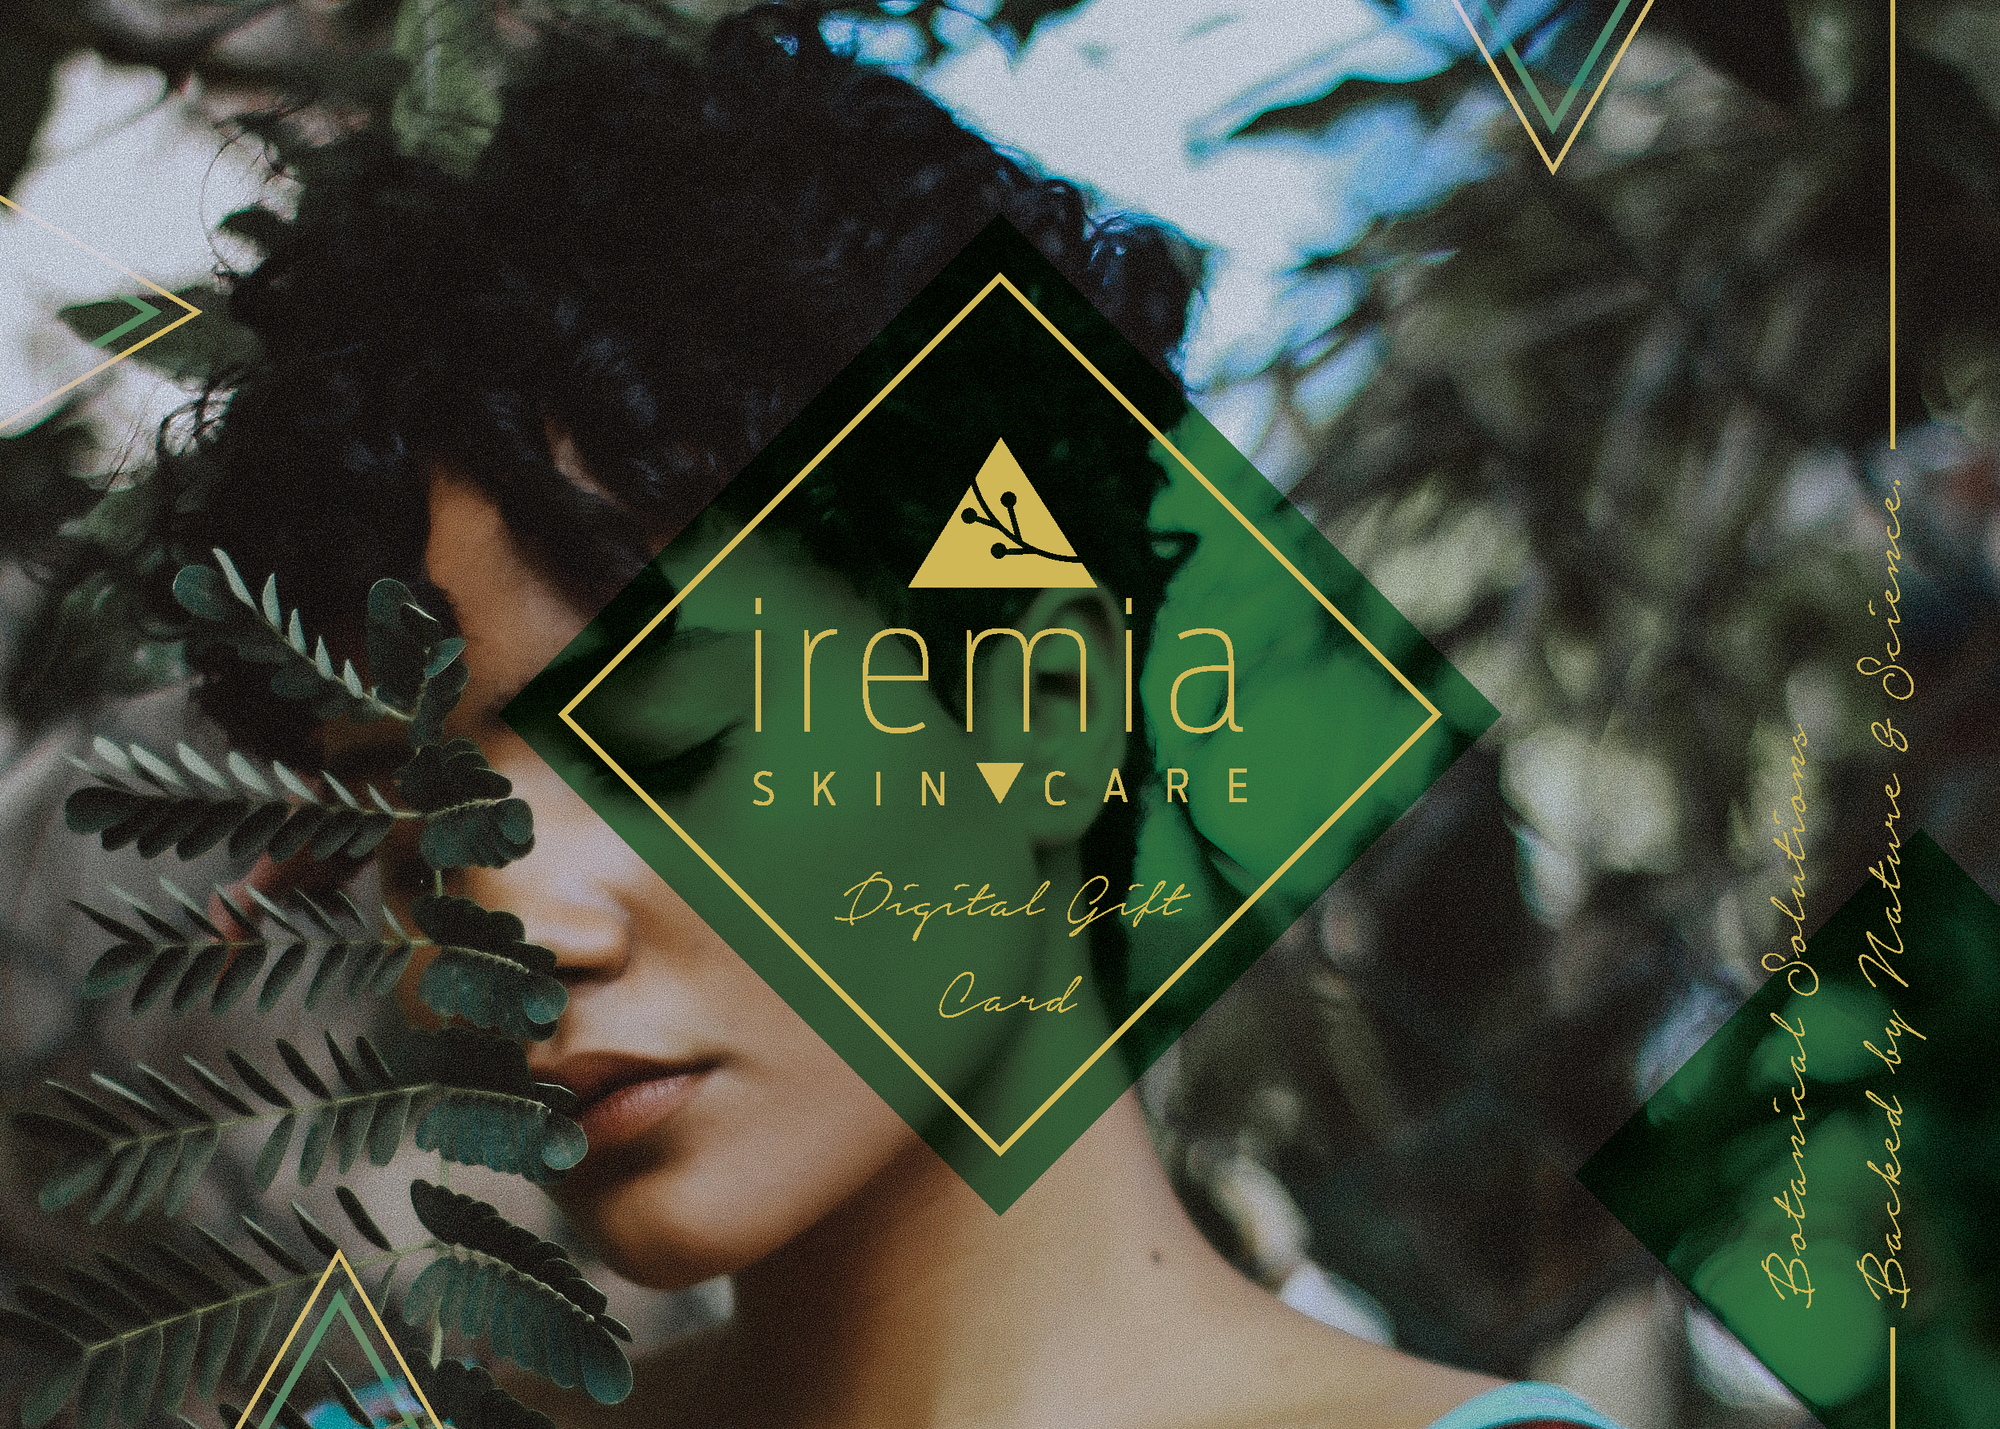 Iremia Skincare Gift Card, the perfect gift for those with sensitive skin. Give the gift of natural skincare and wellness.